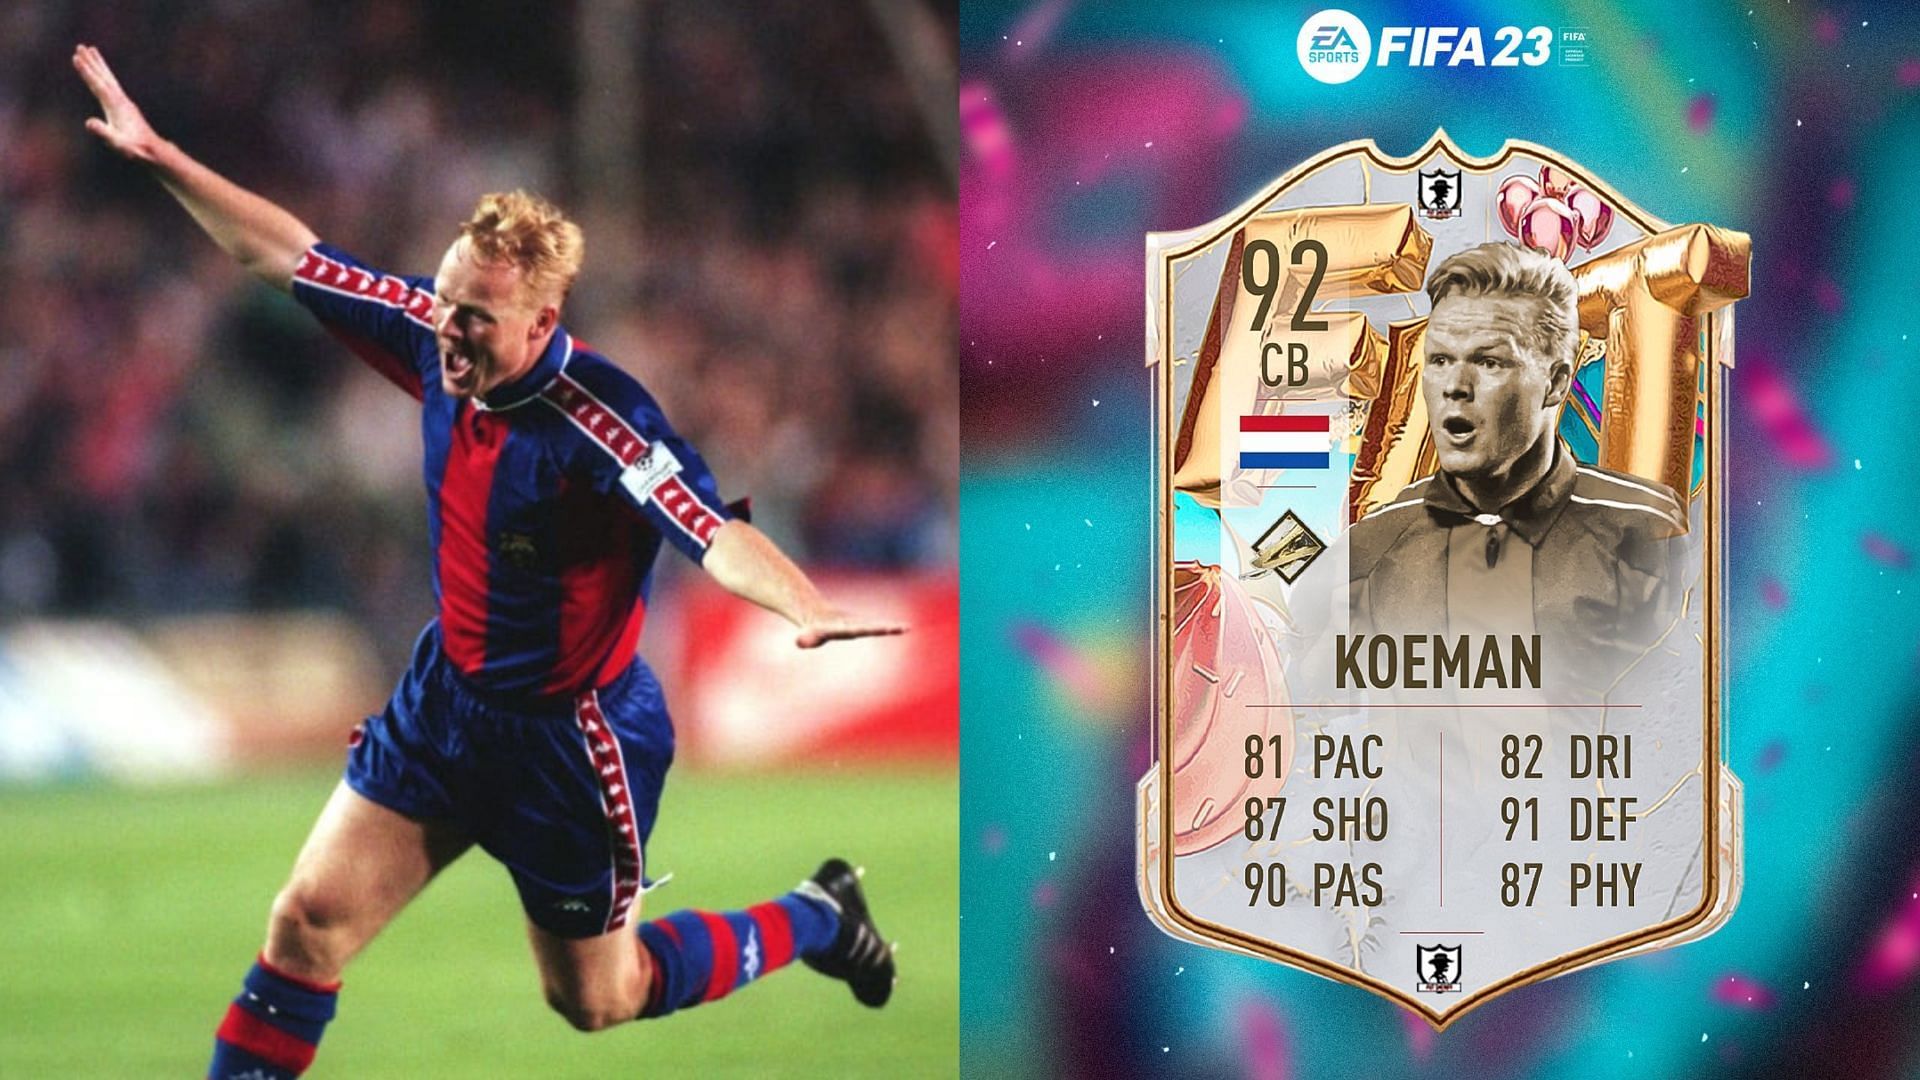 Ronald Koeman&rsquo;s FIFA 23 FUT Birthday Icon card will celebrate his legacy in Barcelona and Dutch colors (Images via Getty, Twitter/FUT Sheriff)